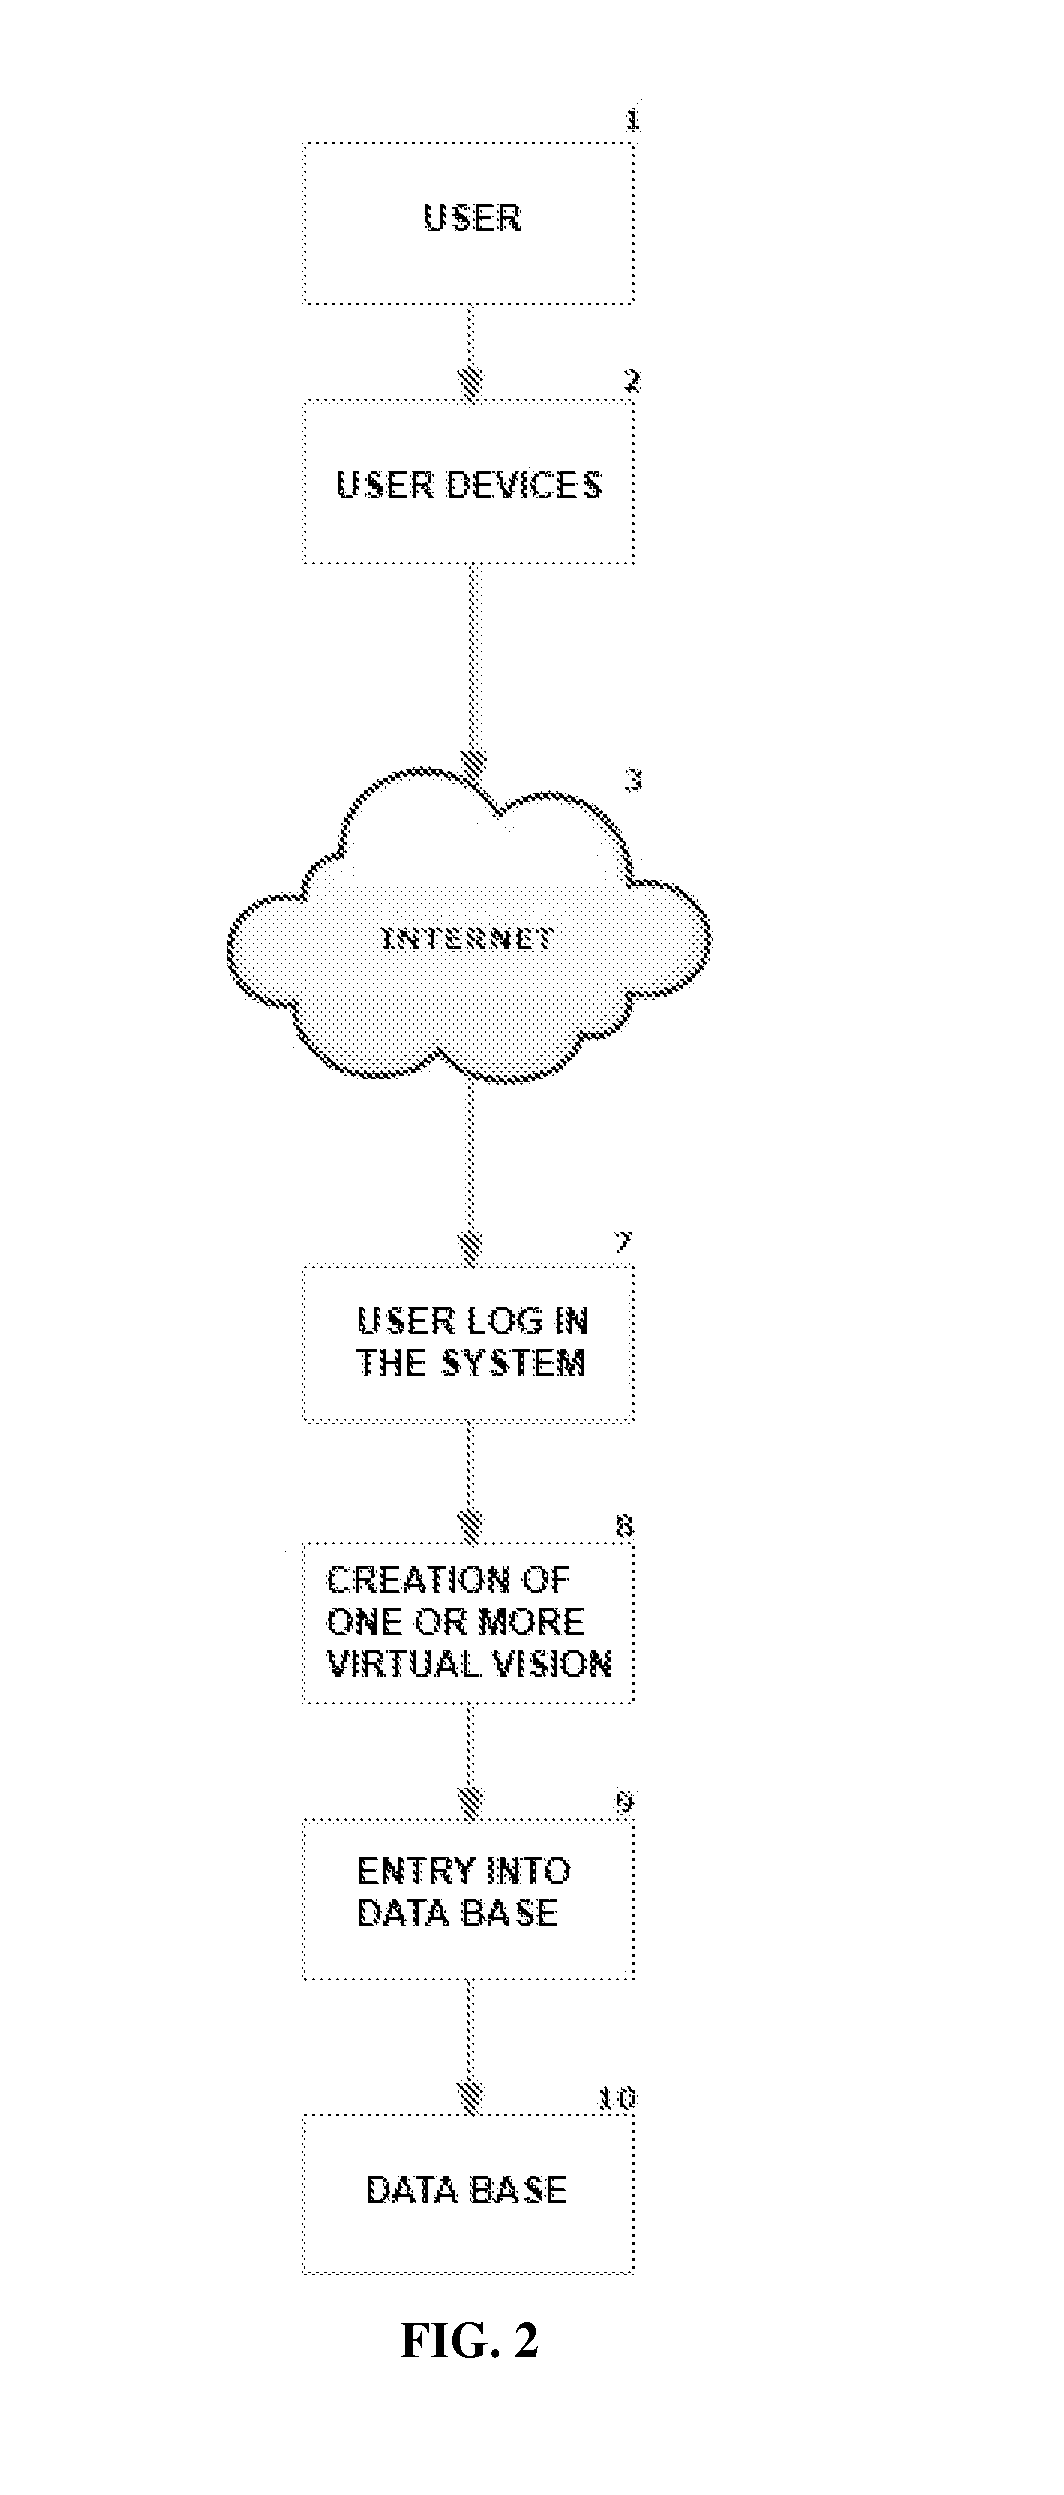 Method for regulated management of virtual visions